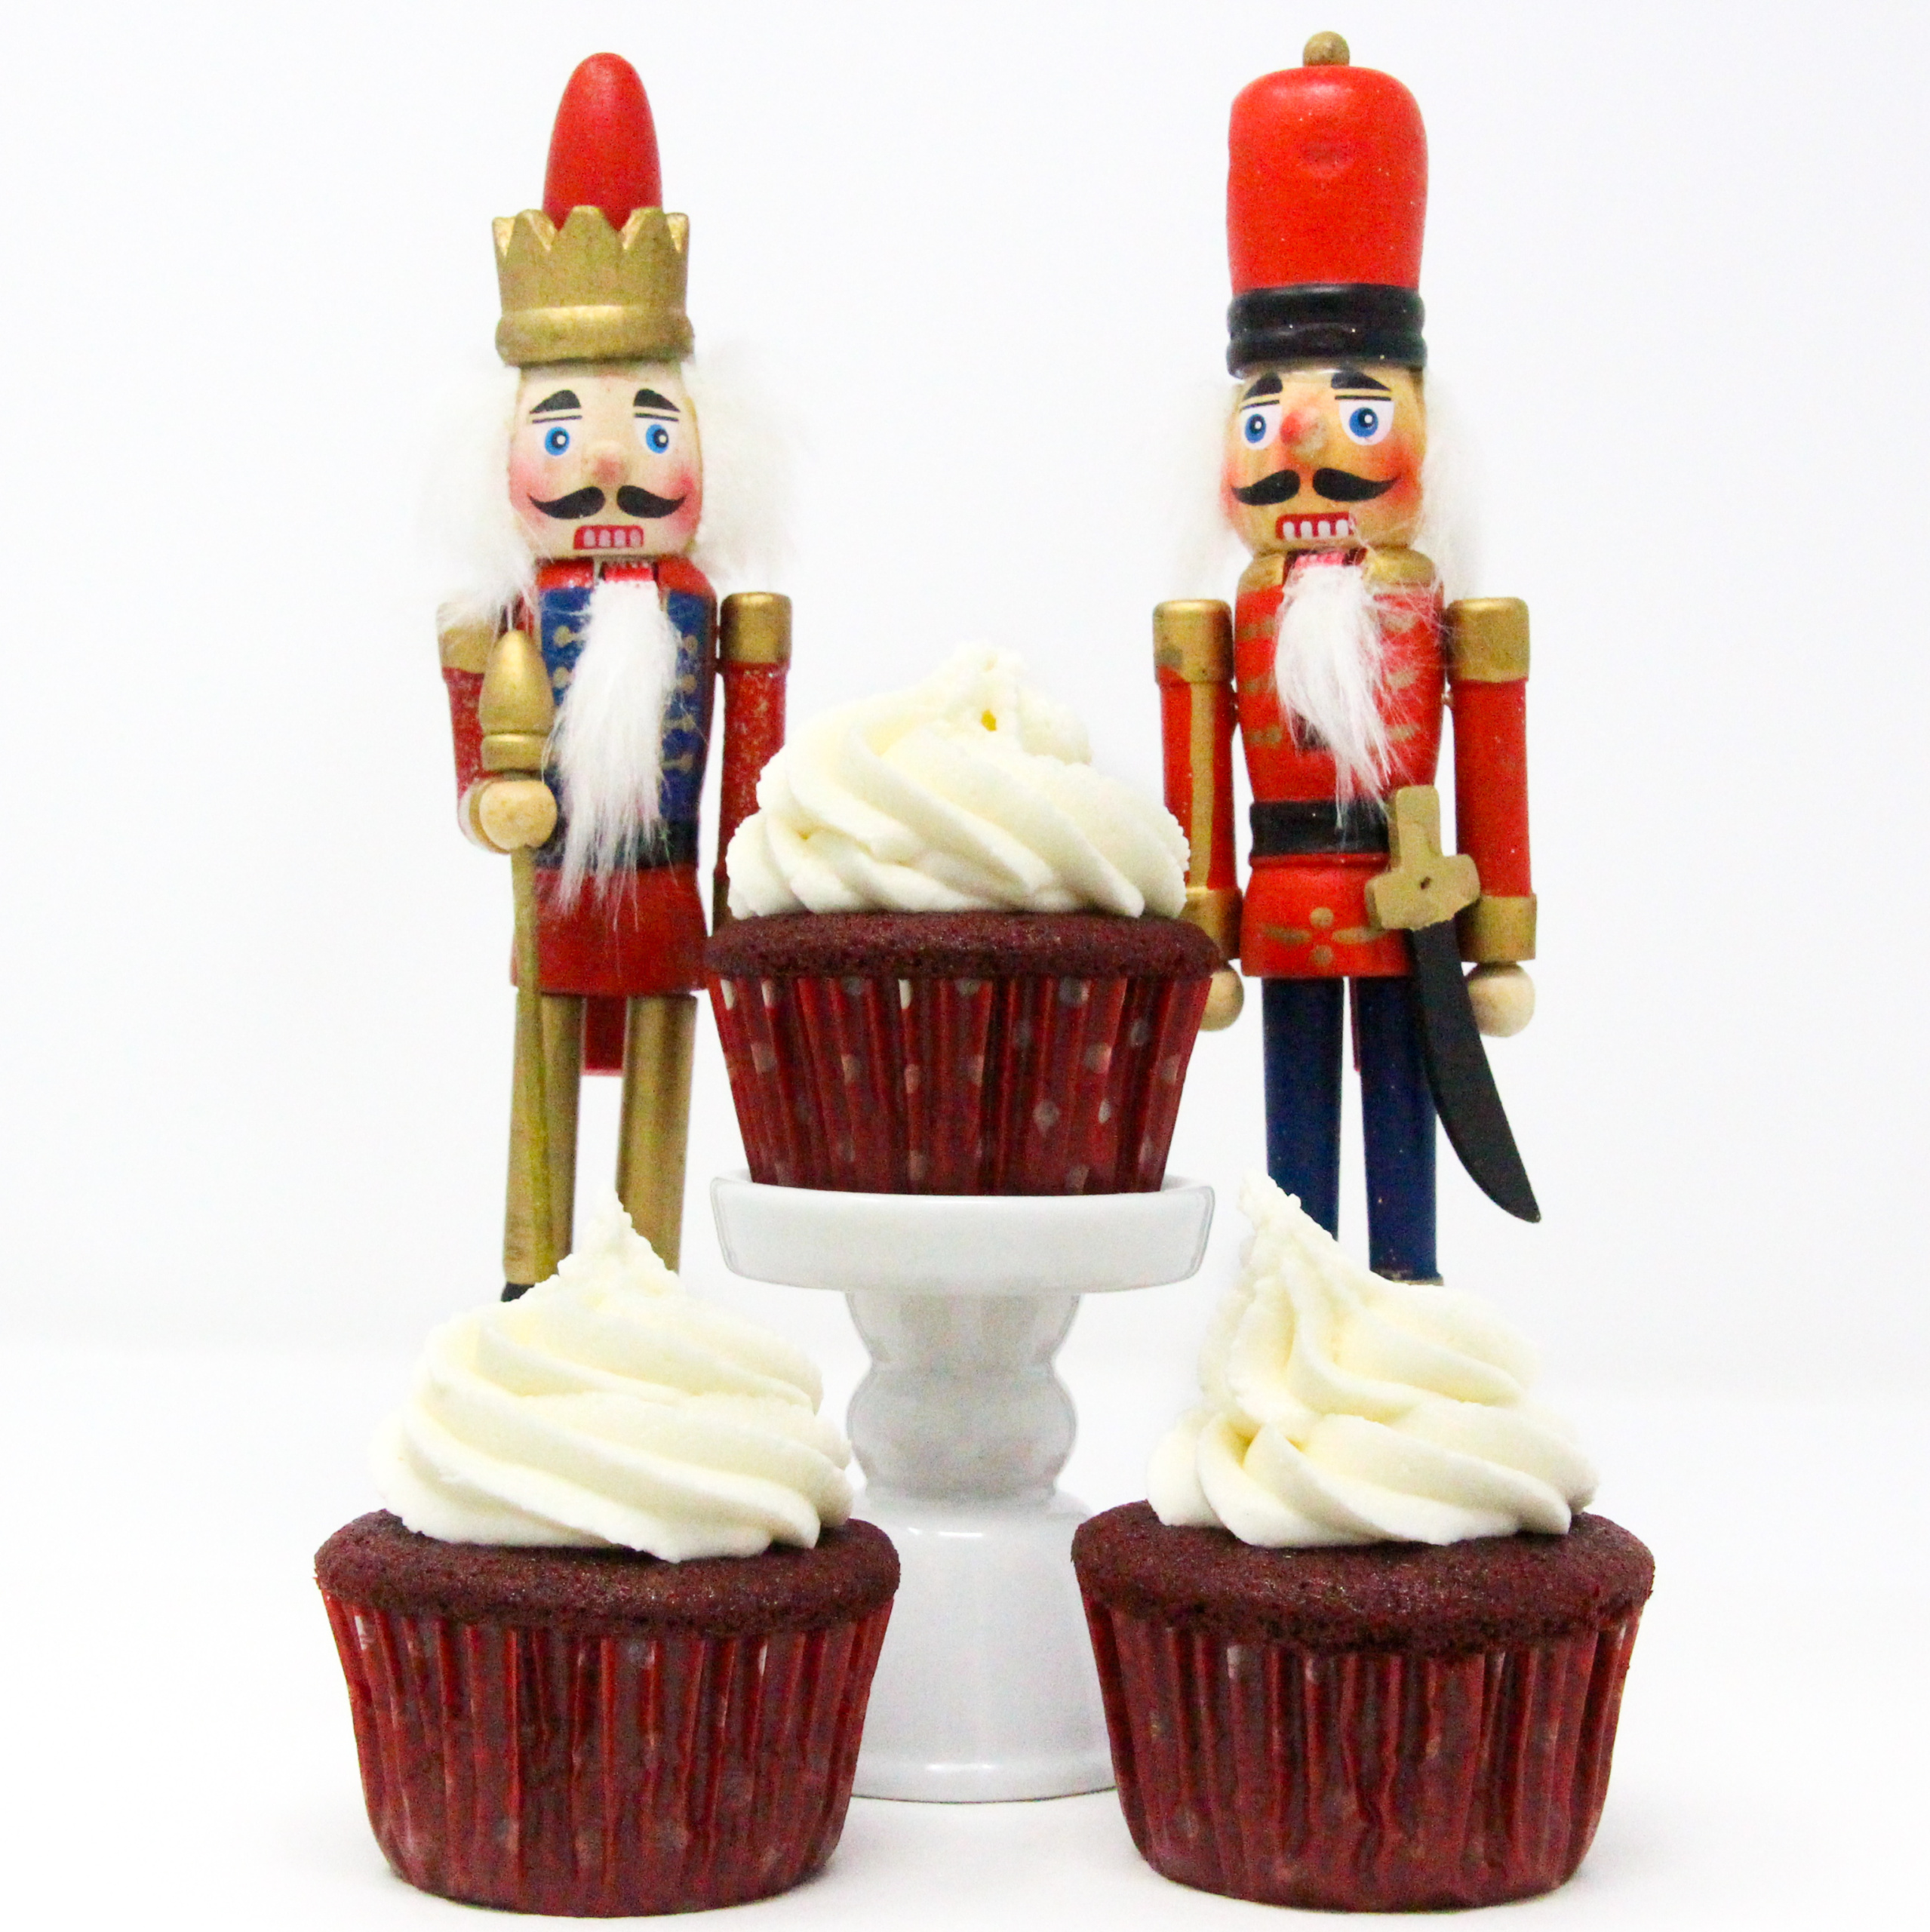 These red velvet cupcakes contain the perfect amount of chocolate and when topped with mounds of sweet buttercream frosting, the results are pure yumminess, making them a delicious way to celebrate the holidays! Recipe shared with permission granted by Christina Romeril, author of A NUTCRACKER NIGHTMARE. 